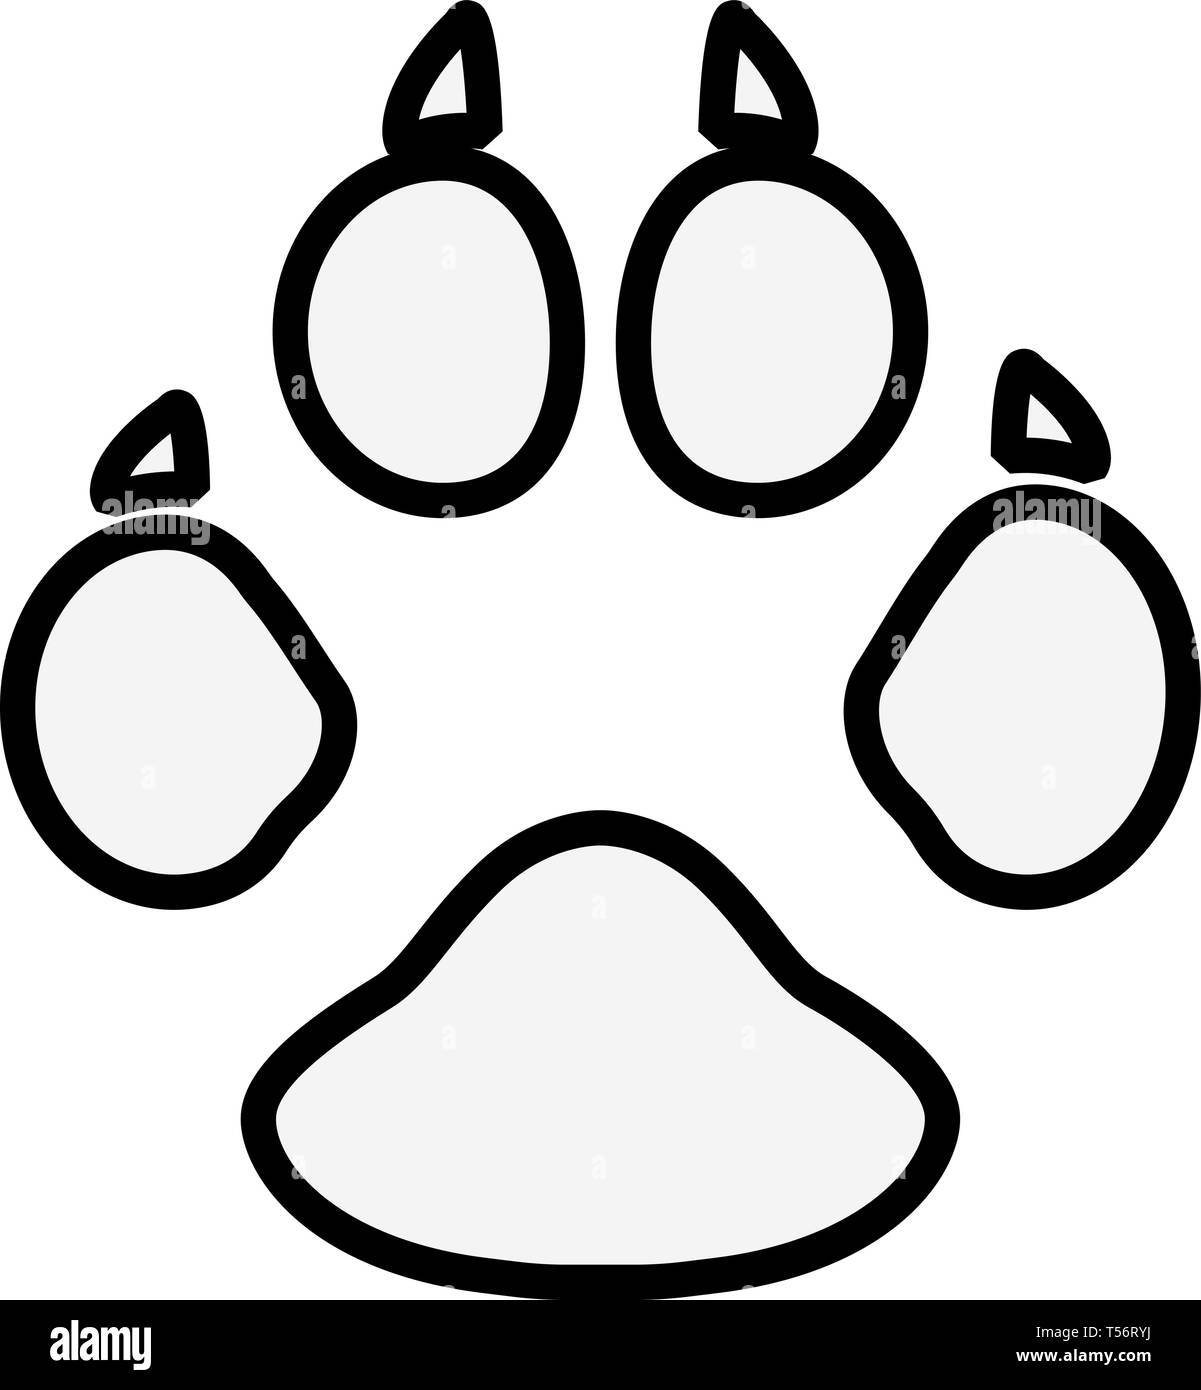 Dog or cat paw print line art vector icon for animal apps and websites eps10 Stock Vector